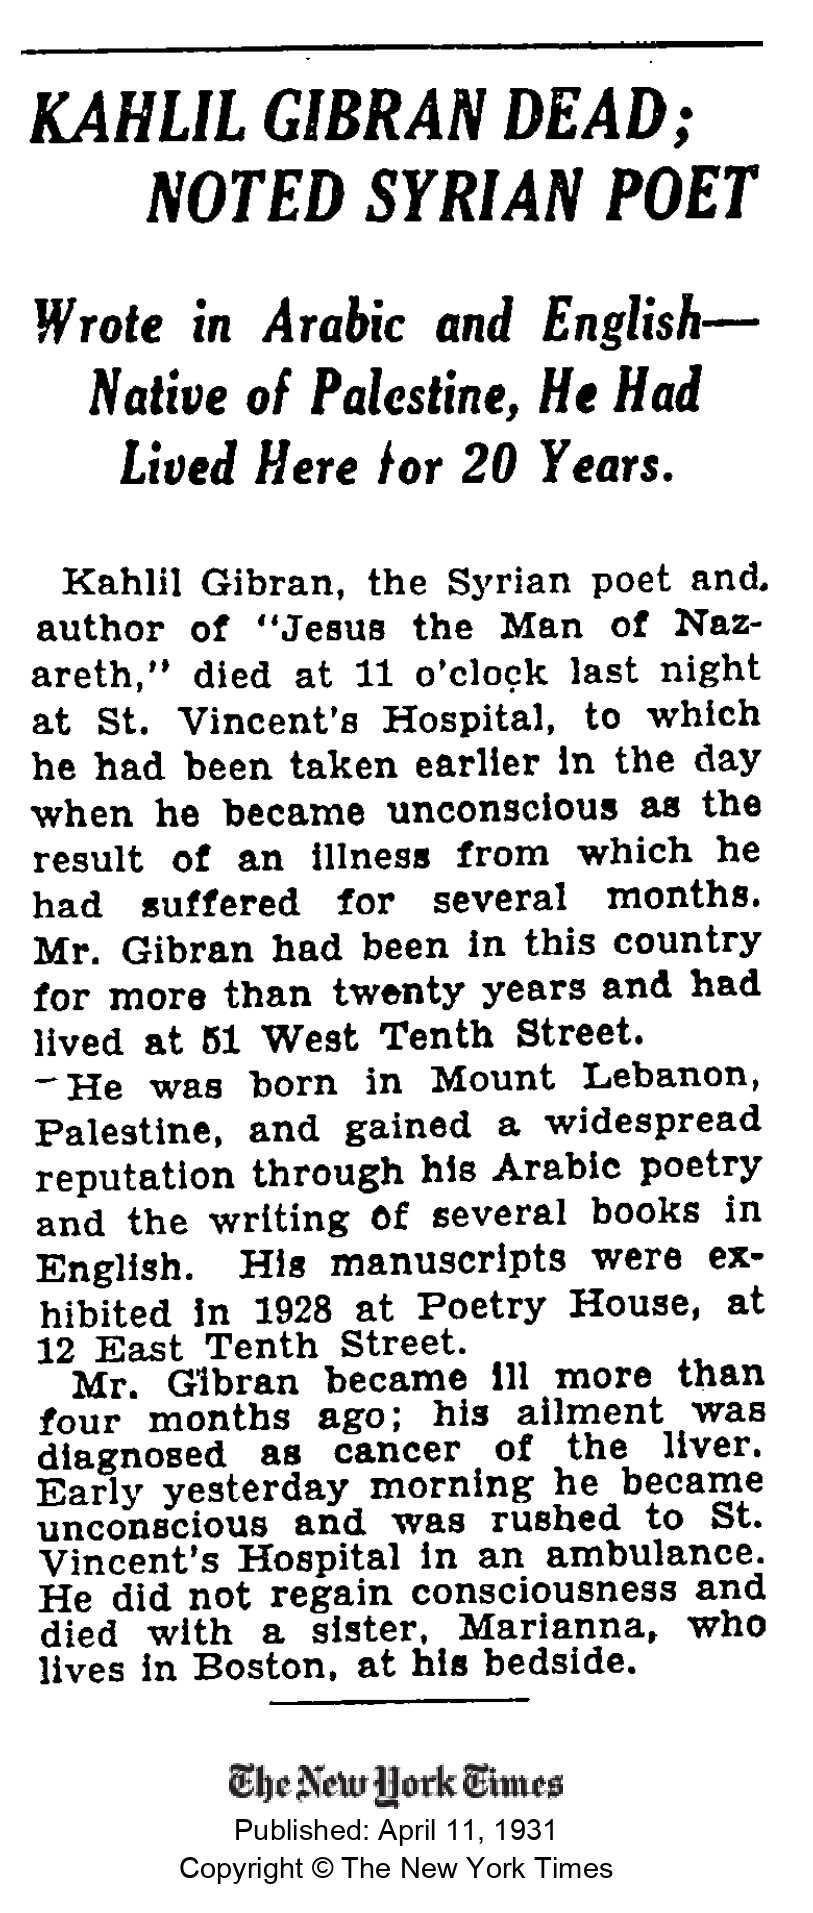 Kahlil Gibran Dead; Noted Syrian Poet, The New York Times, Apr 1, 1931